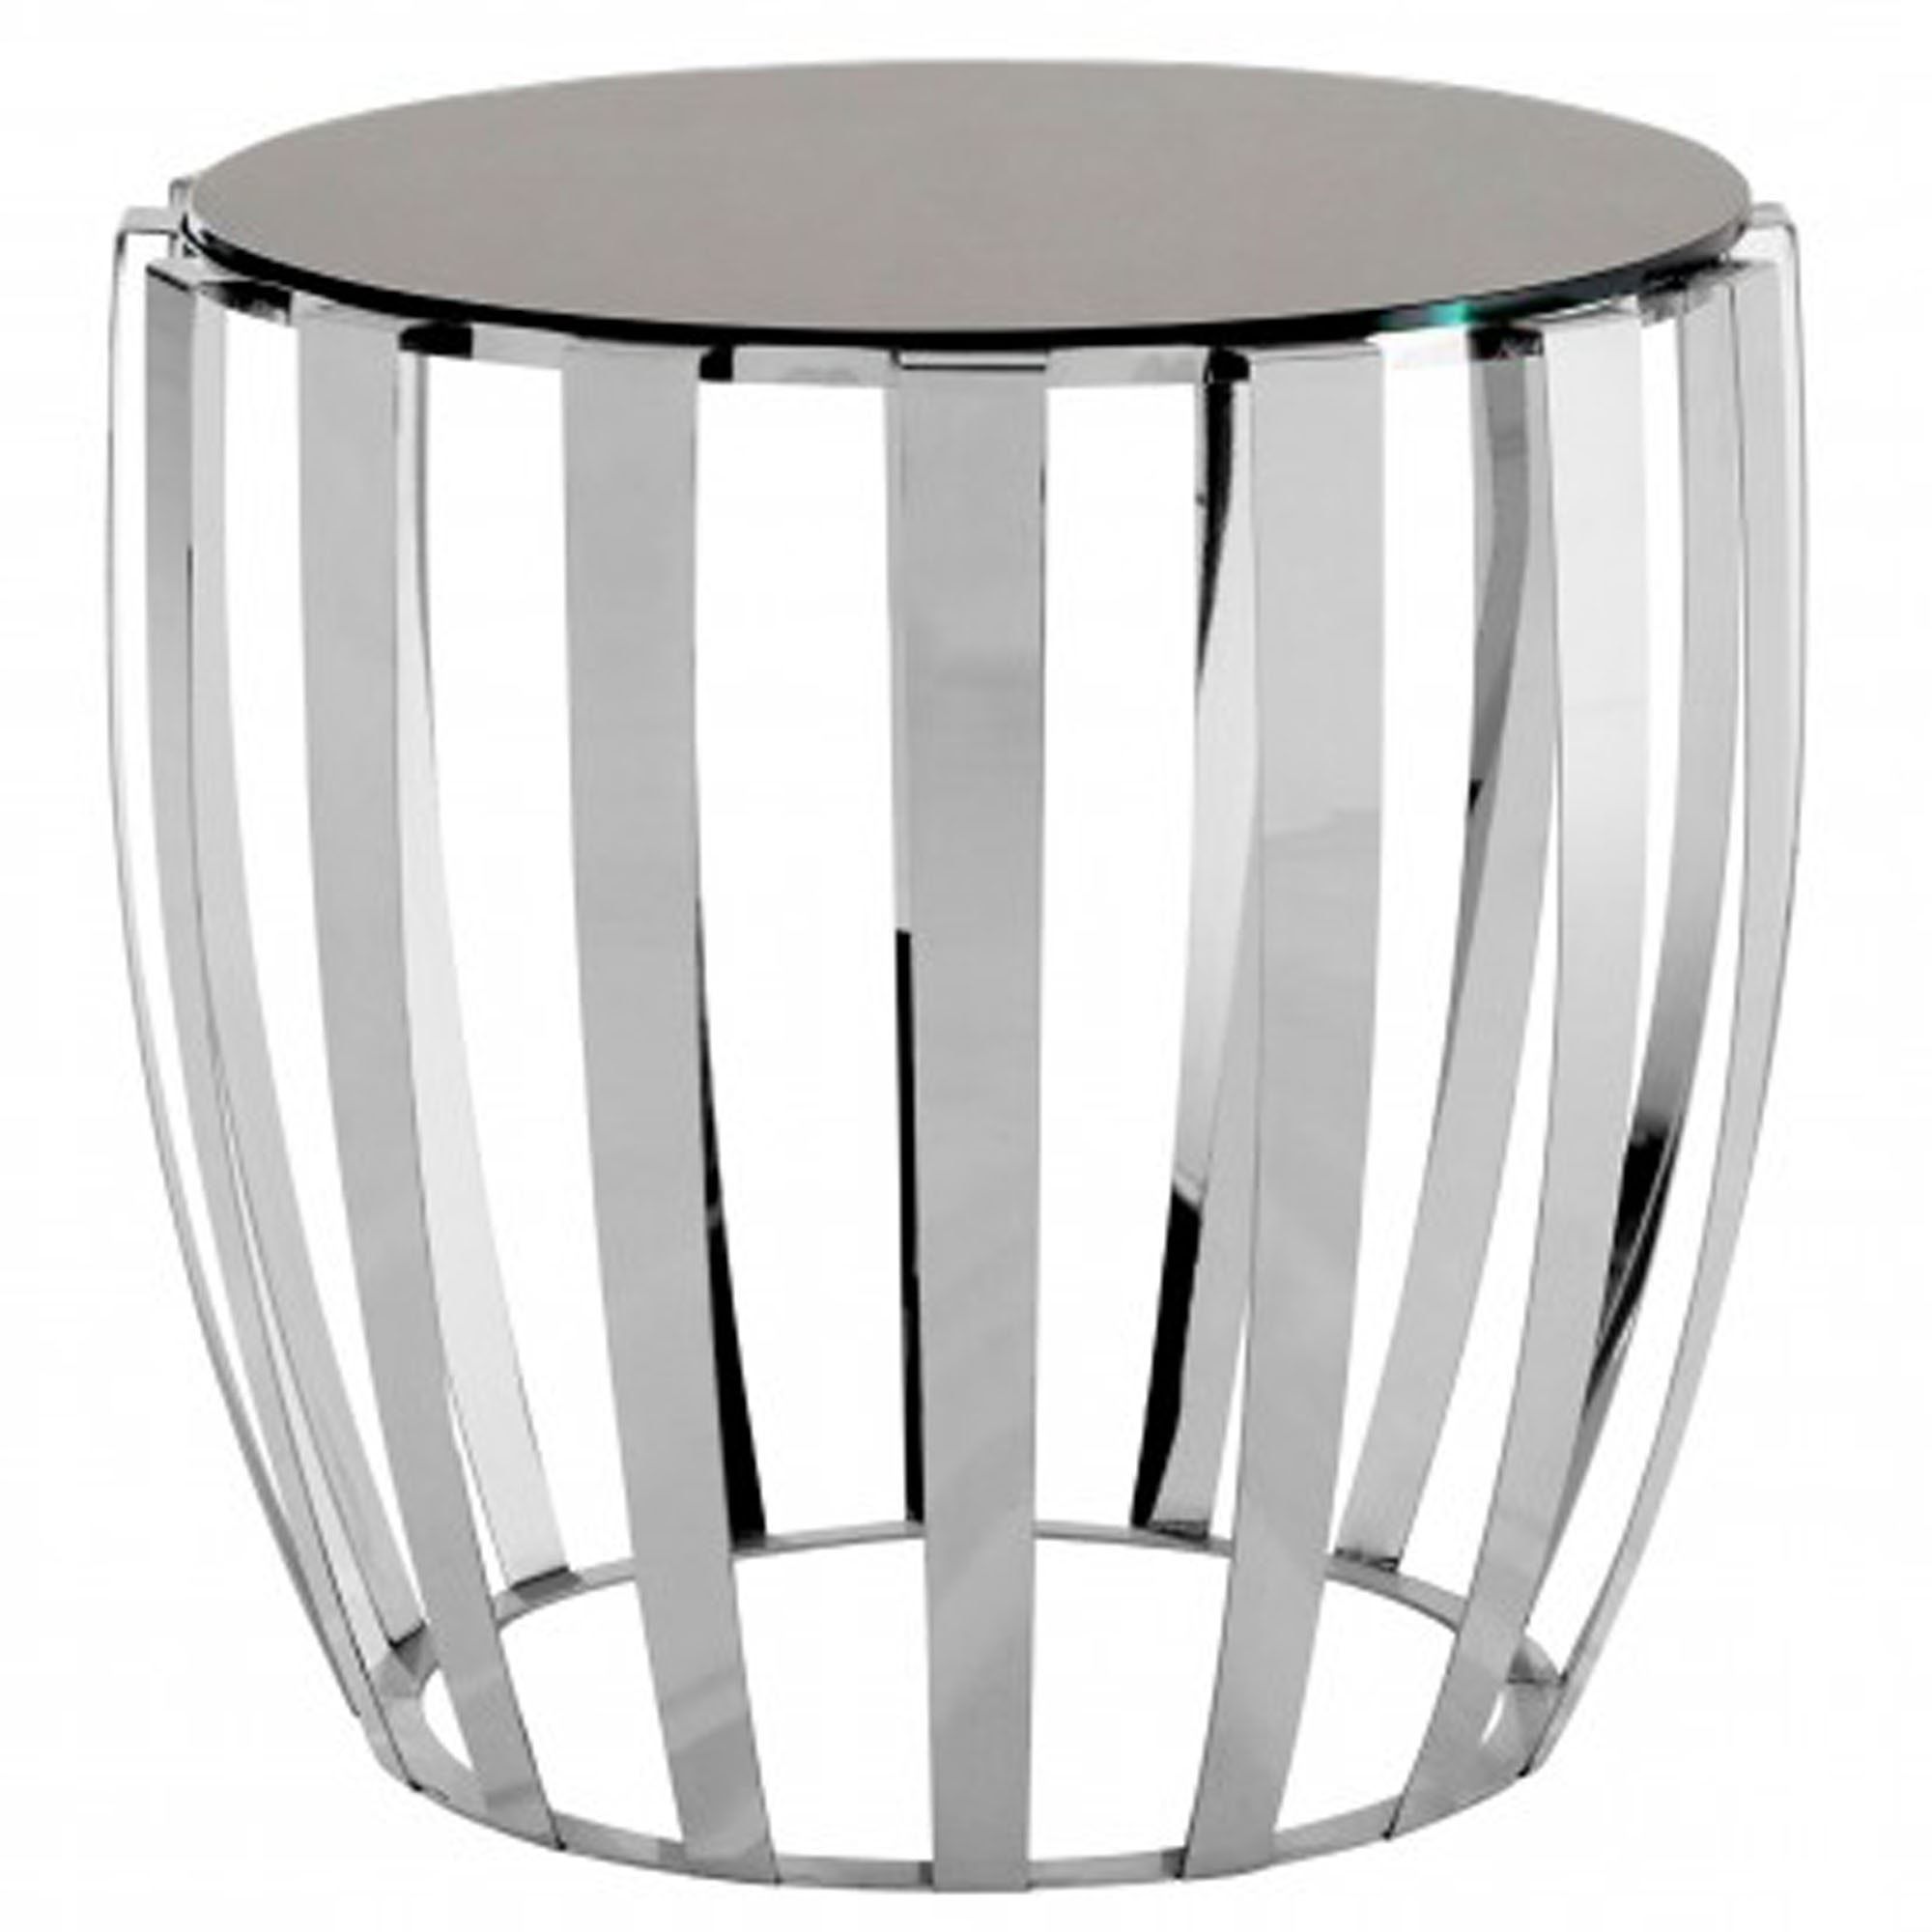 Modern Furniture For Recent Silver Stainless Steel Coffee Tables (View 6 of 20)